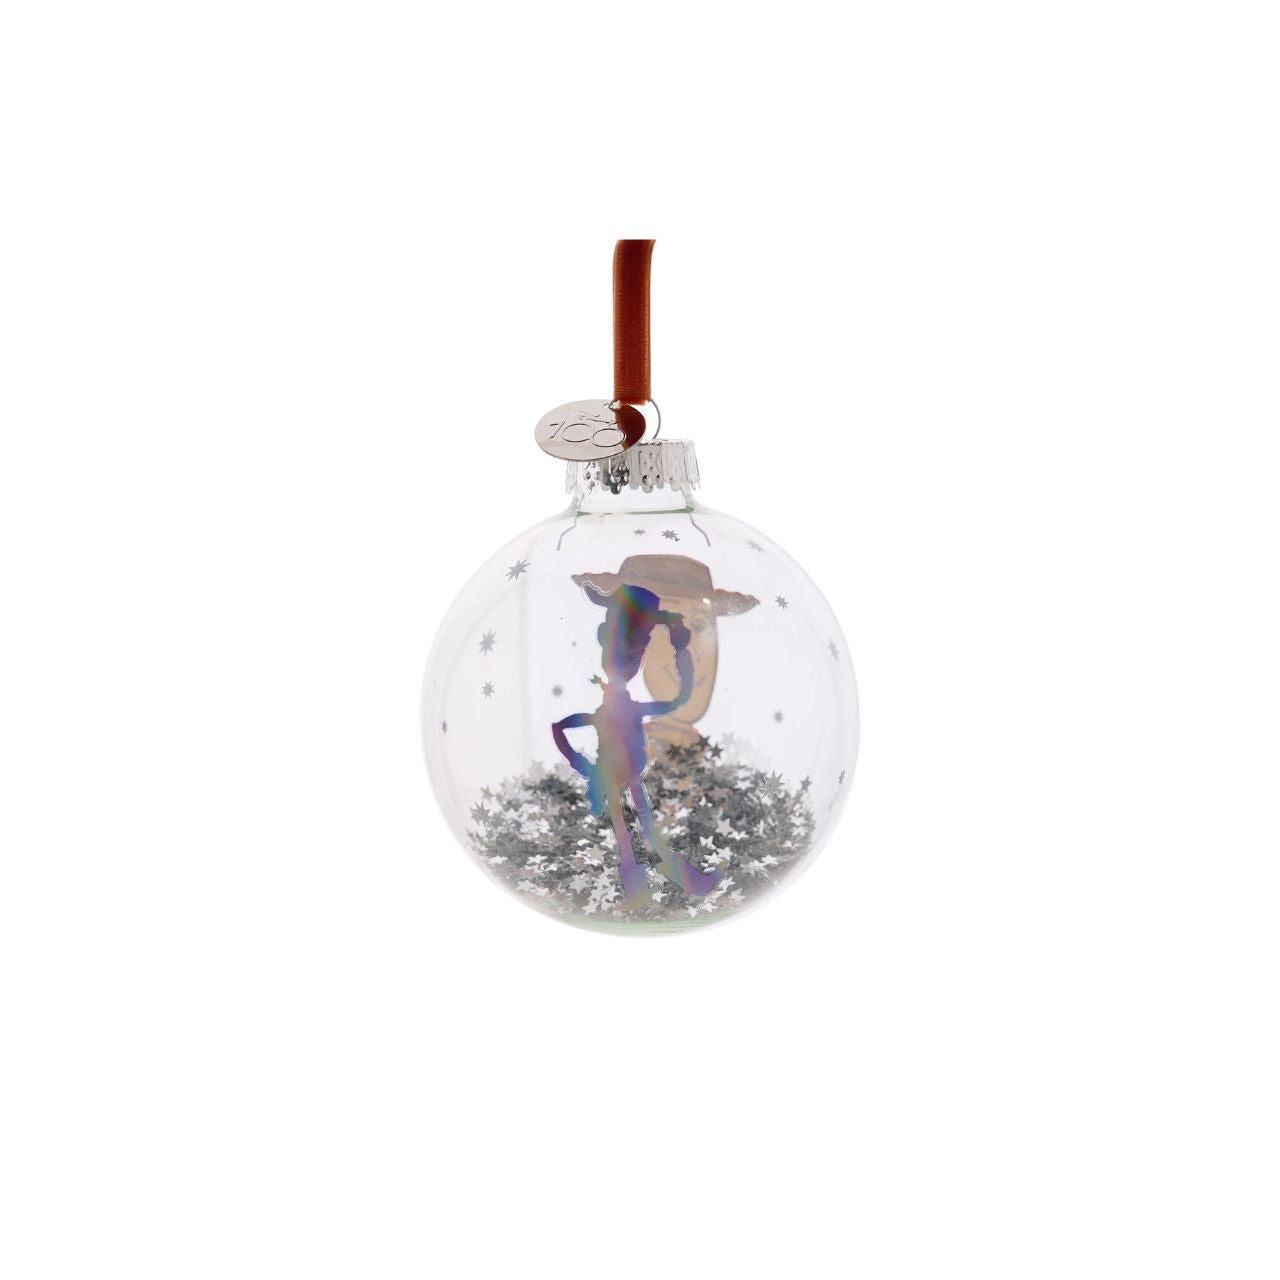 Disney 100th Anniversary Bauble - Woody  A Woody glass bauble from Disney 100 by DISNEY.  This limited edition tree decoration captures the true magic of Disney on its centenary and can be enjoyed by fans of all ages at Christmas.